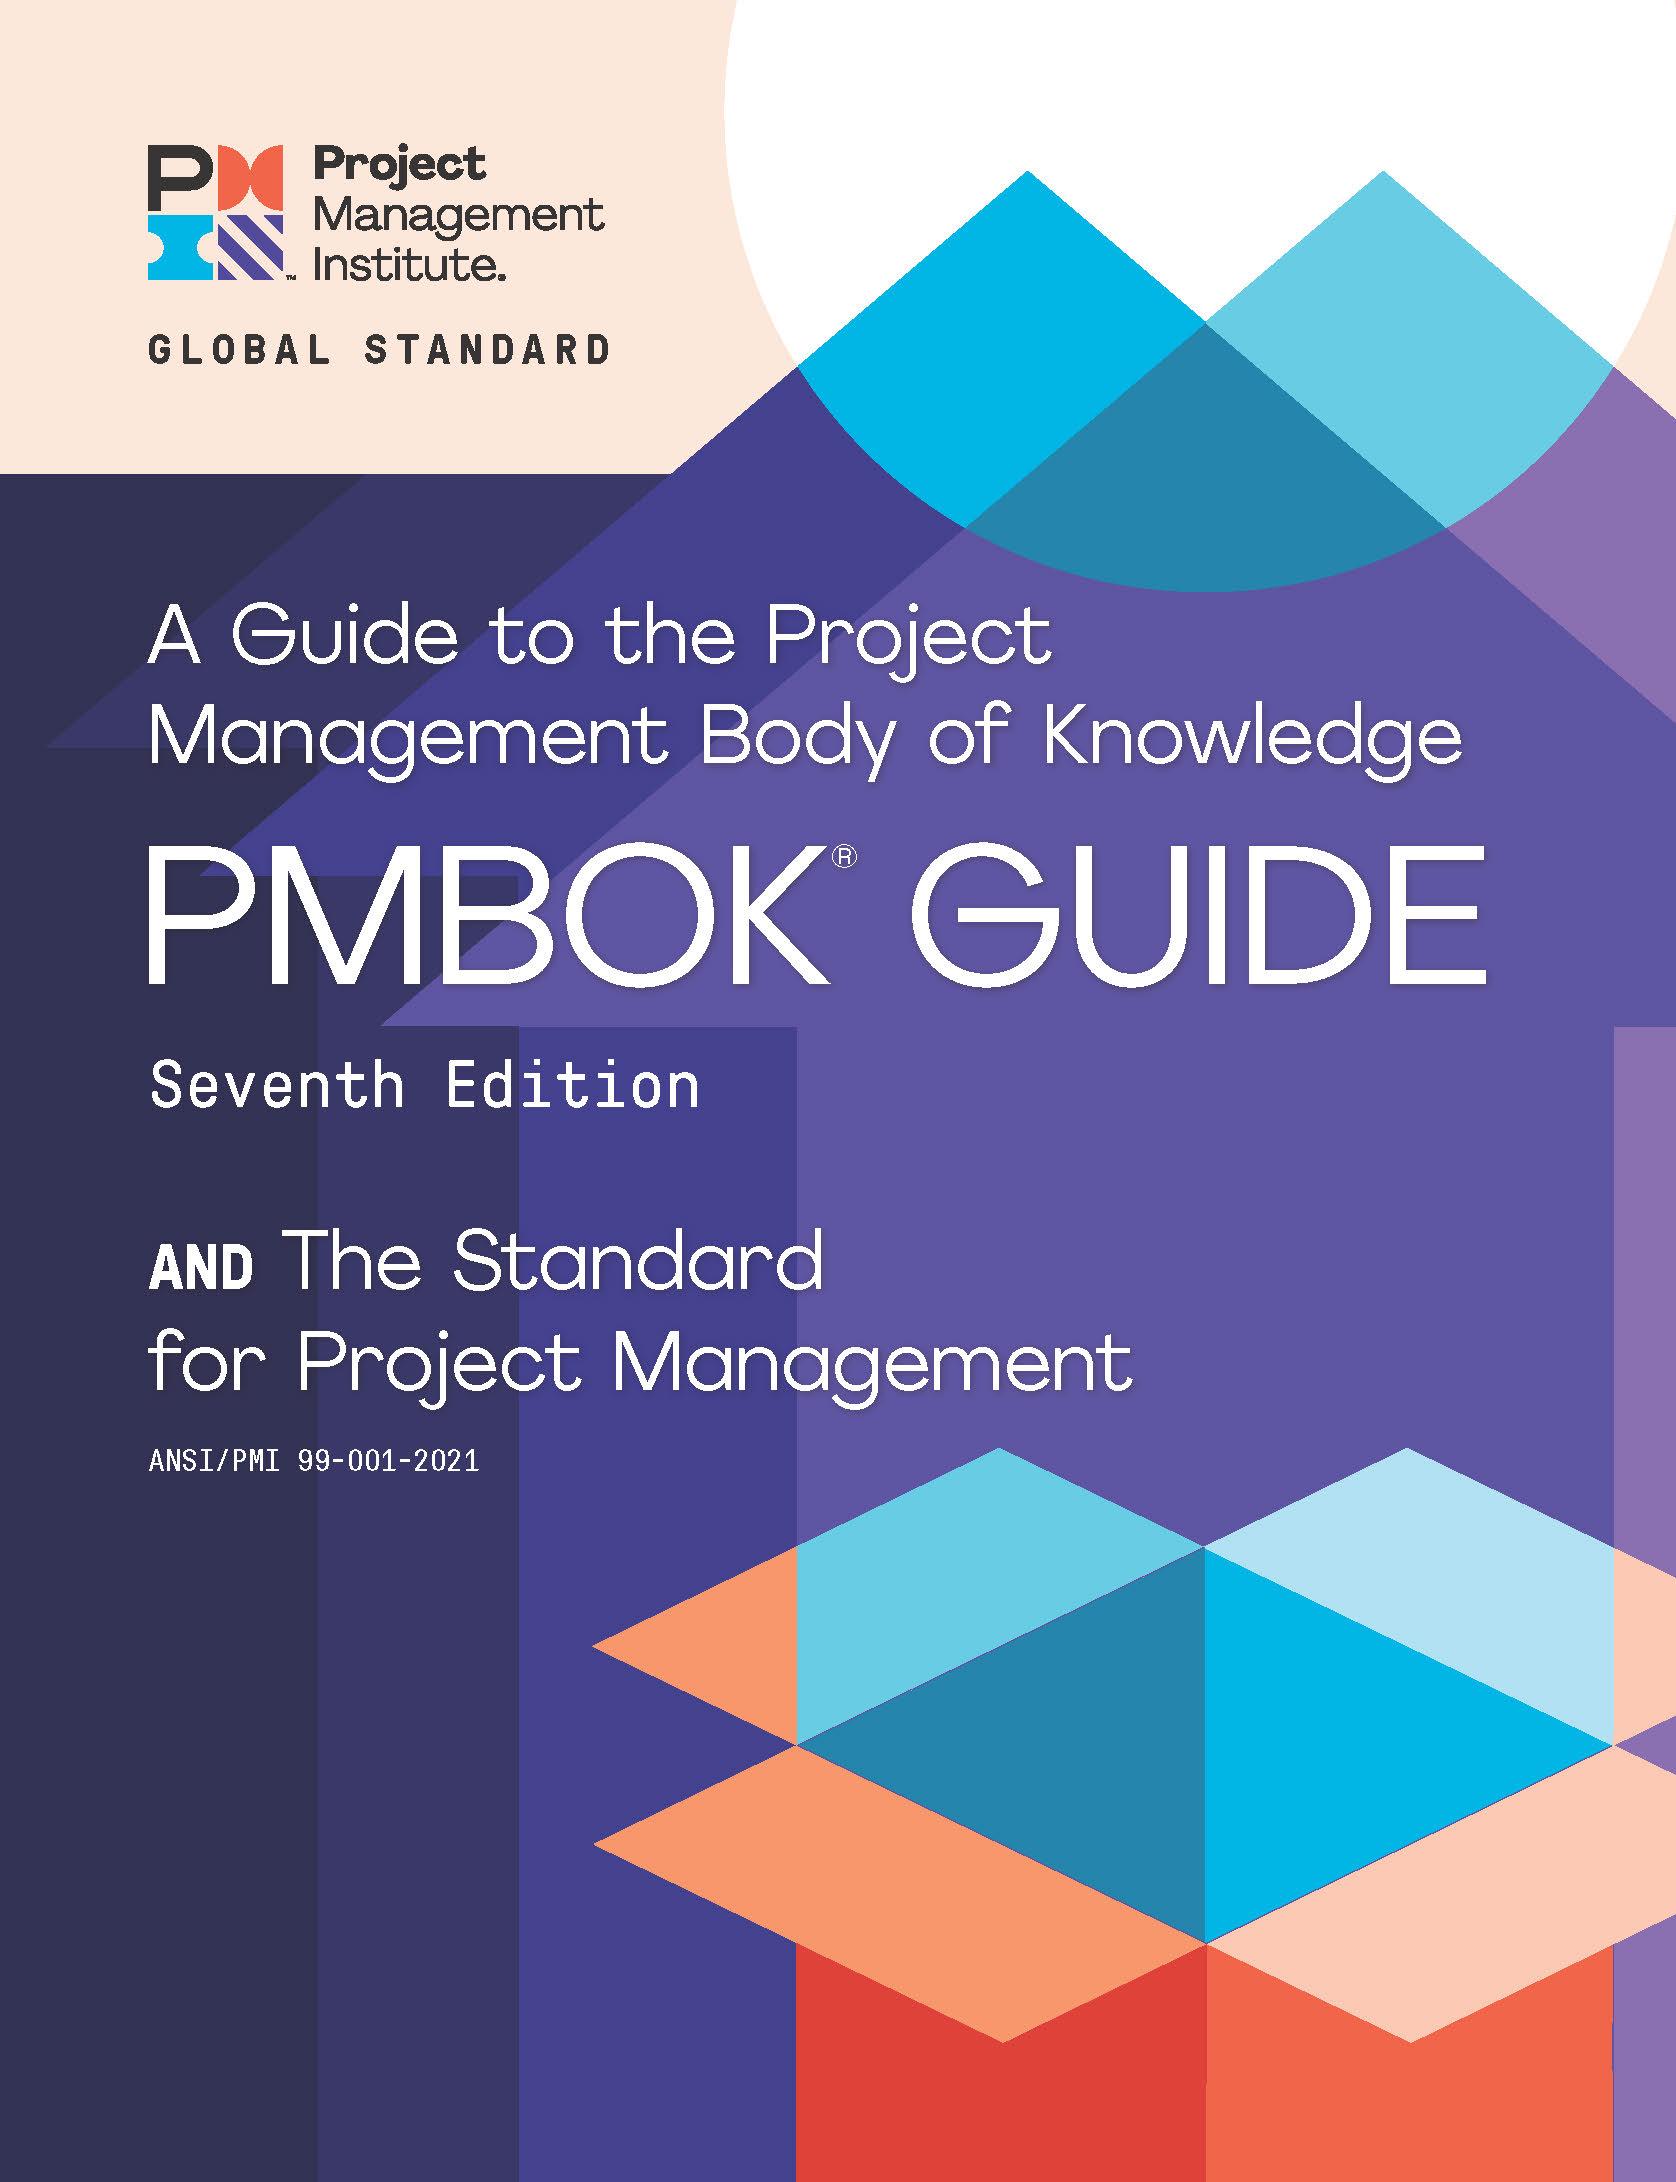 PMBOK-guide-7th-cover.jpg